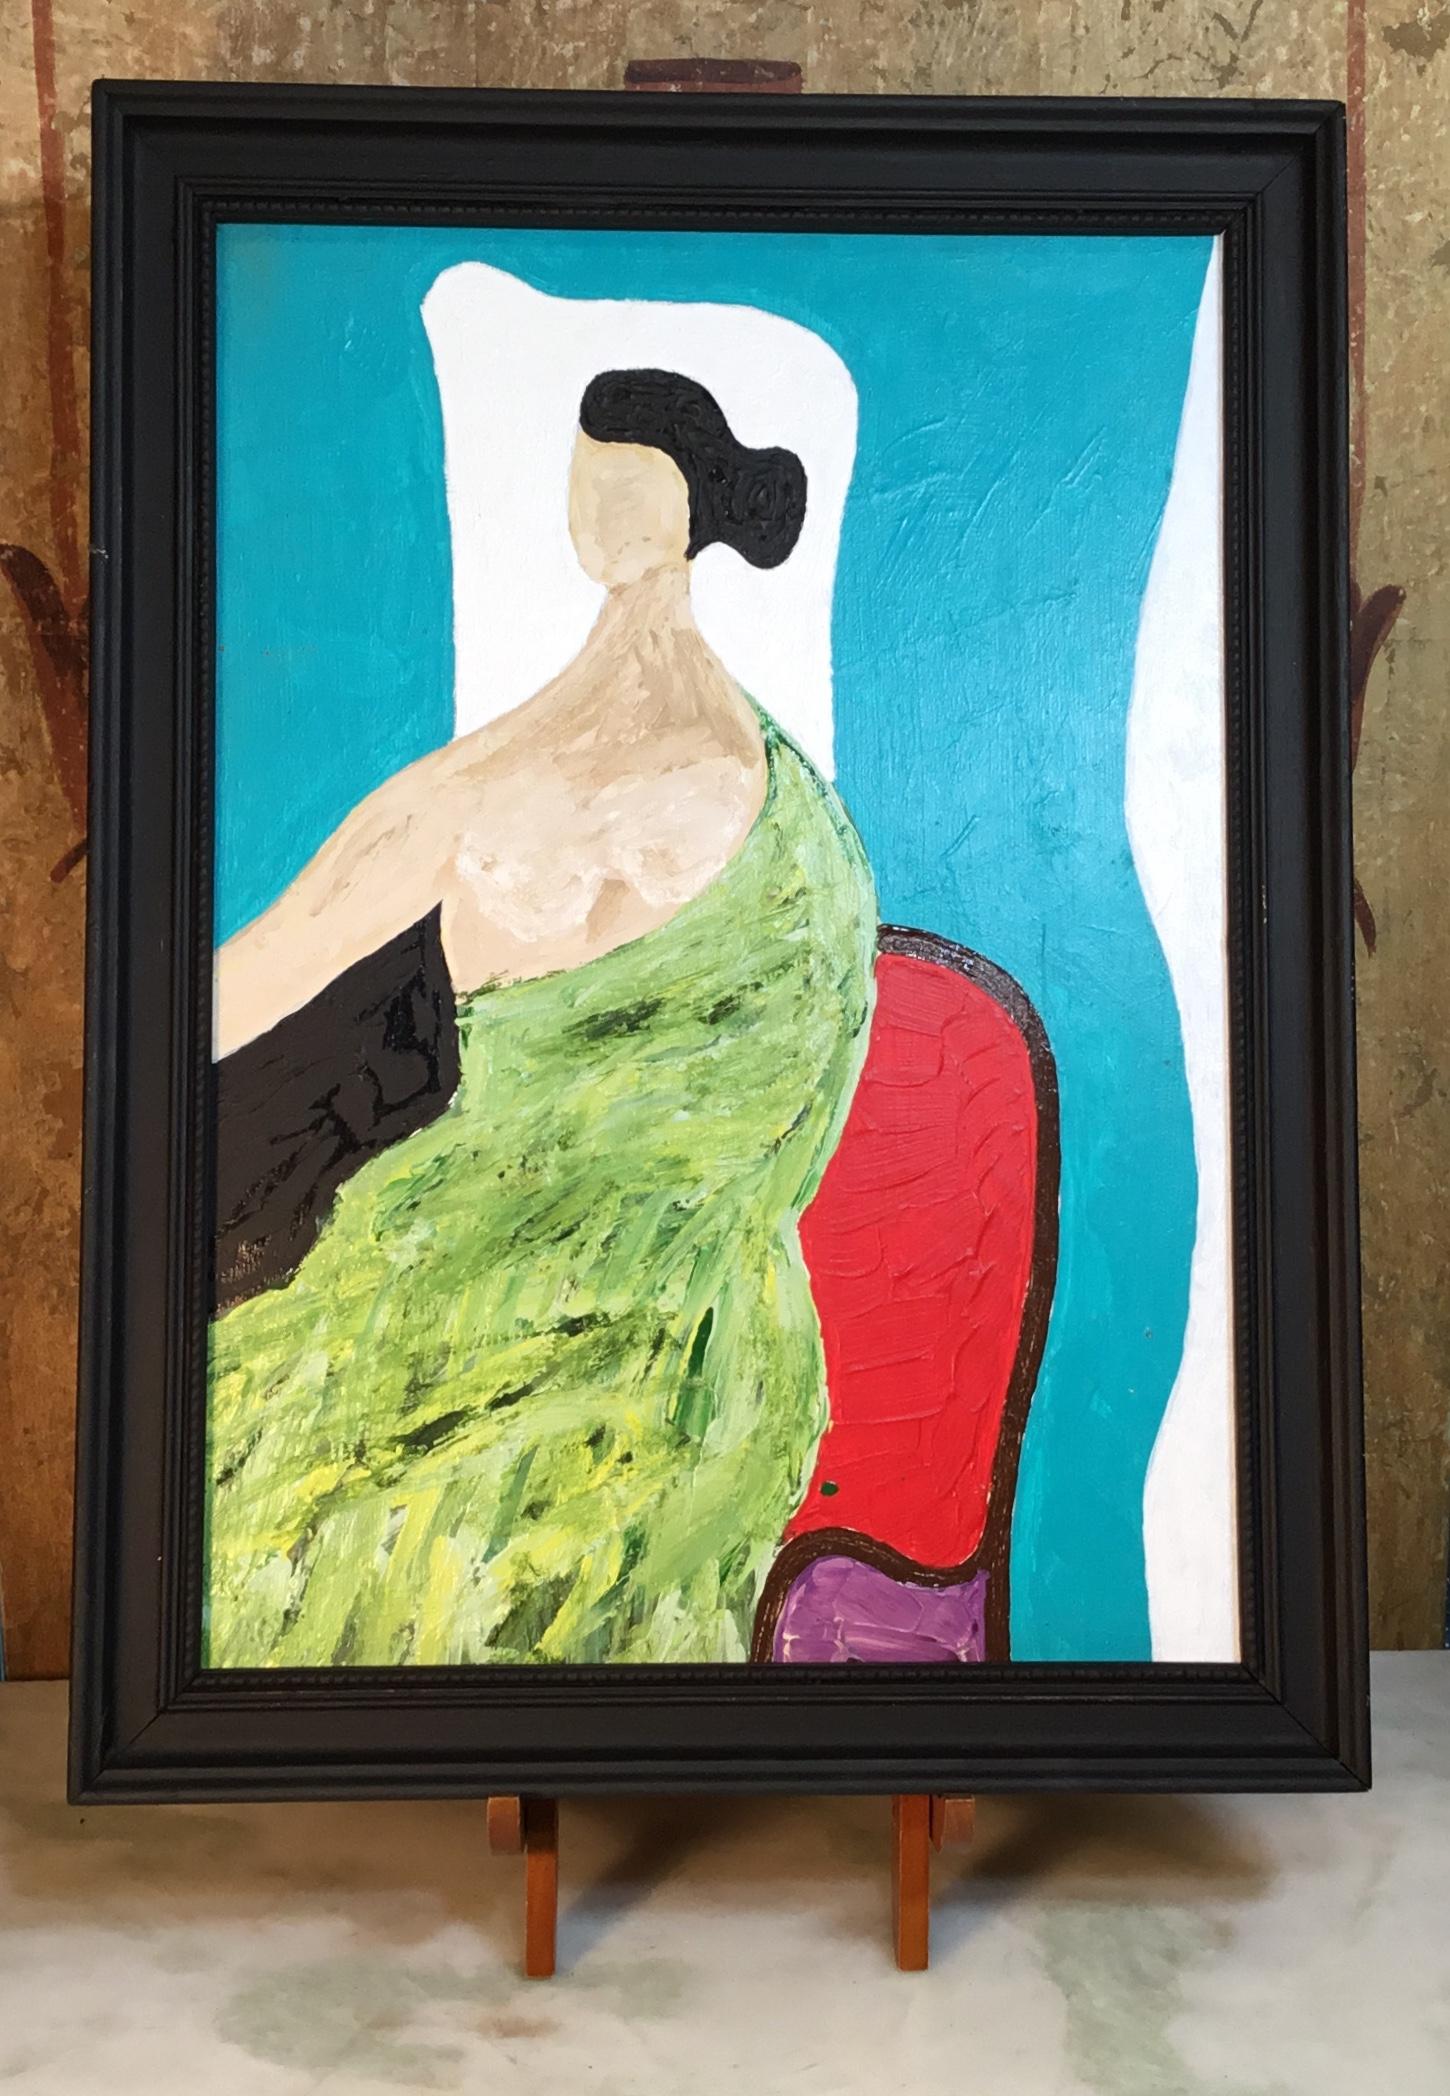 Funky painting of sitting elegant woman looking forward, beautiful vivid colors on turquoise color background. Black wood frame with extra table wood display piece which is included. Signed J.M in the back.